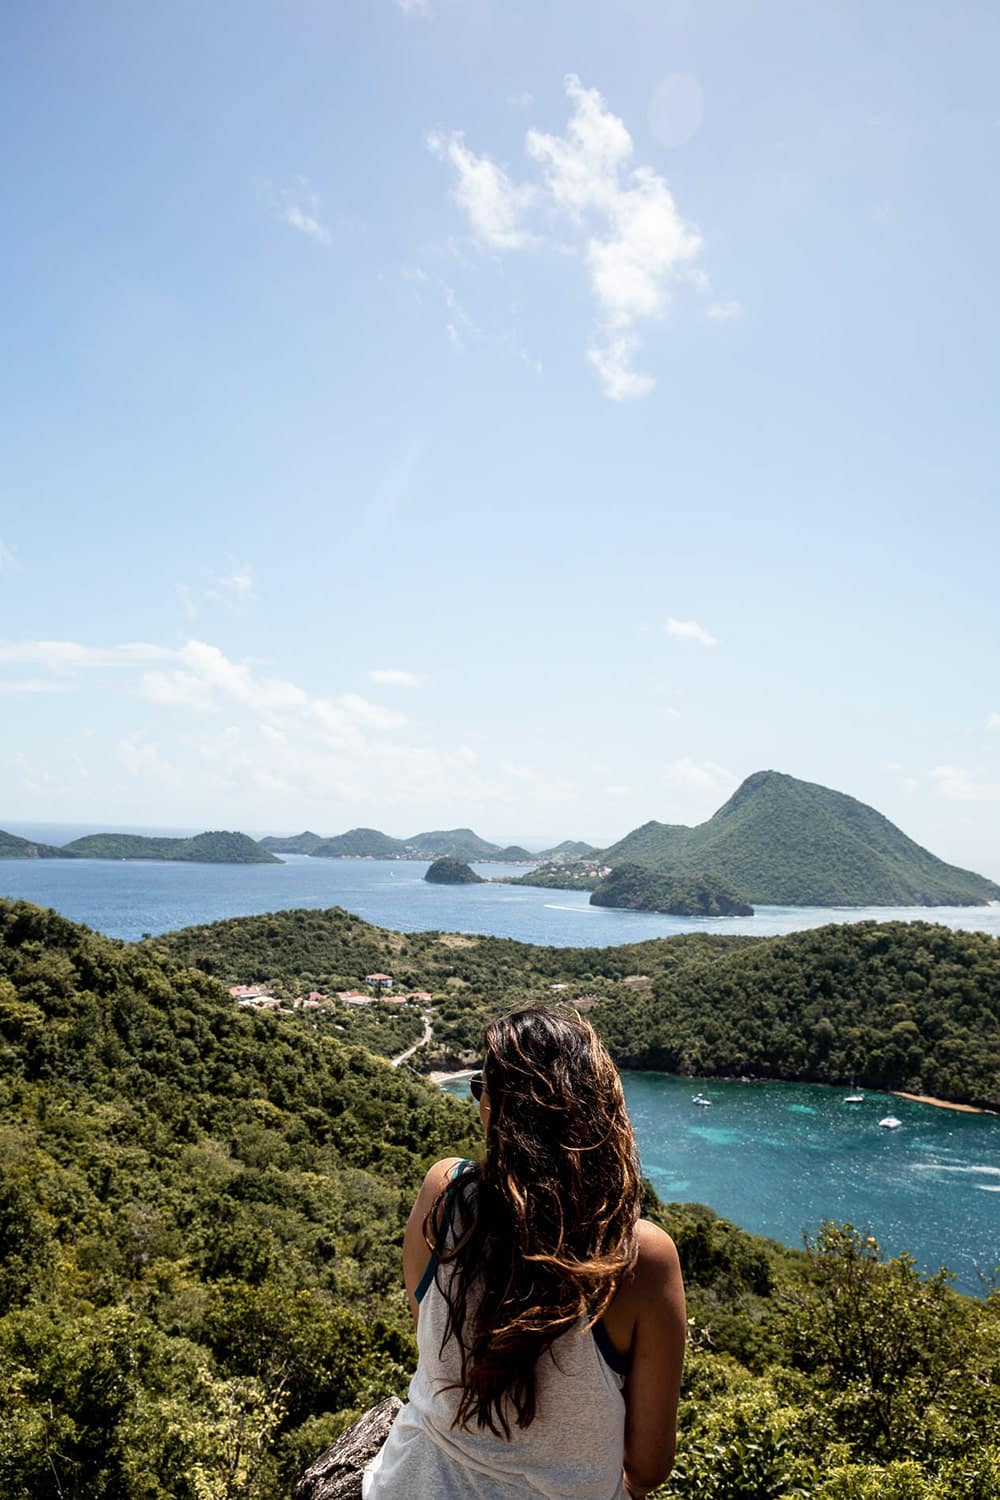 A two-day visit to Les Saintes | An archipelago of heavenly landscapes